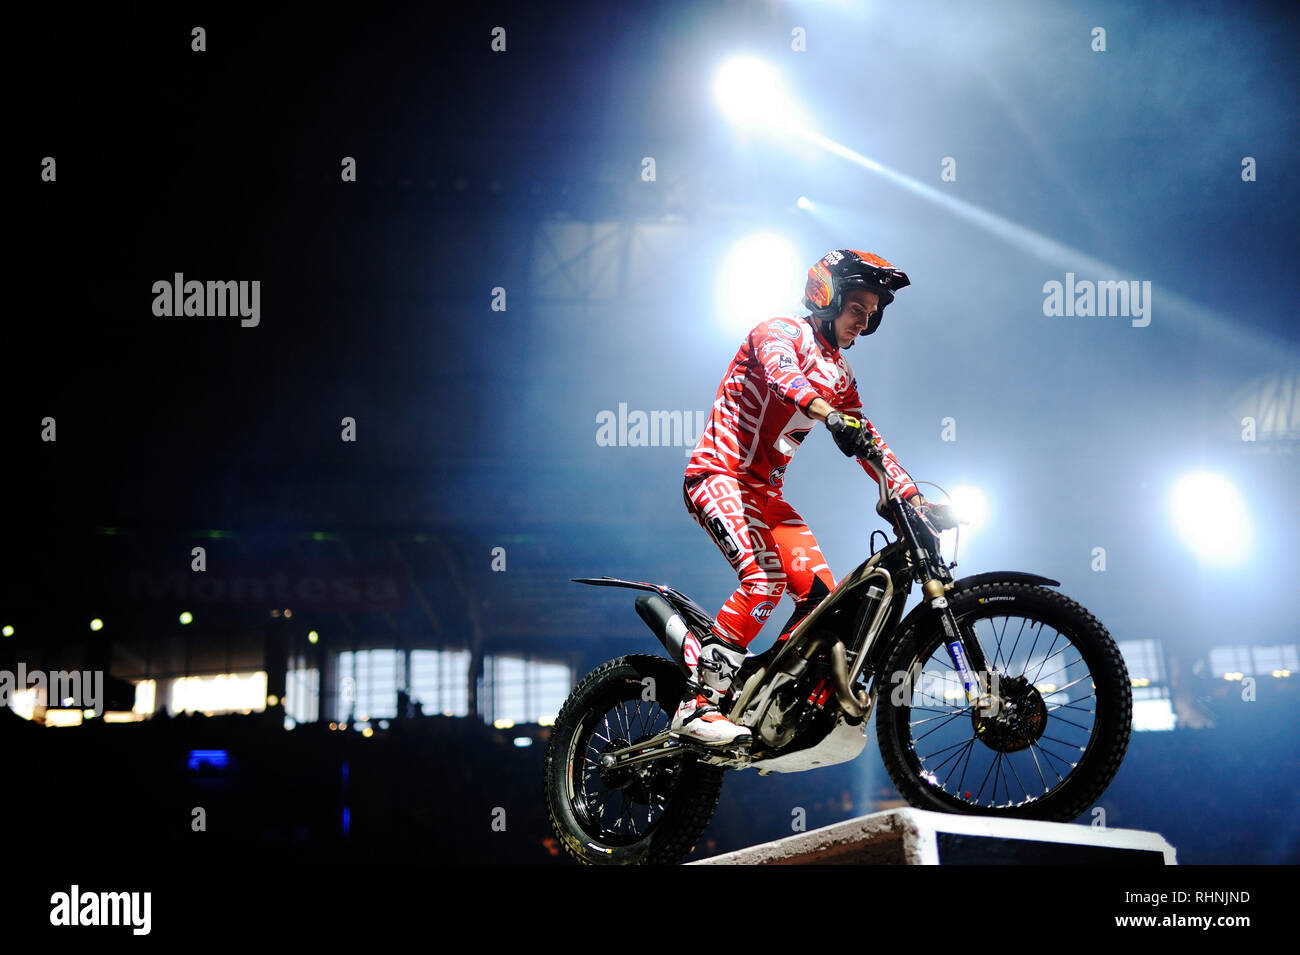 Barcelona, Spain 3rd February, 2019.  Jeroni Fajardo of the Gas Gas Team in action during the Barcelona Solo Moto Trial indoor at the Palau Sant Jordi. Credit: Pablo Guillen/Alamy Live News Stock Photo